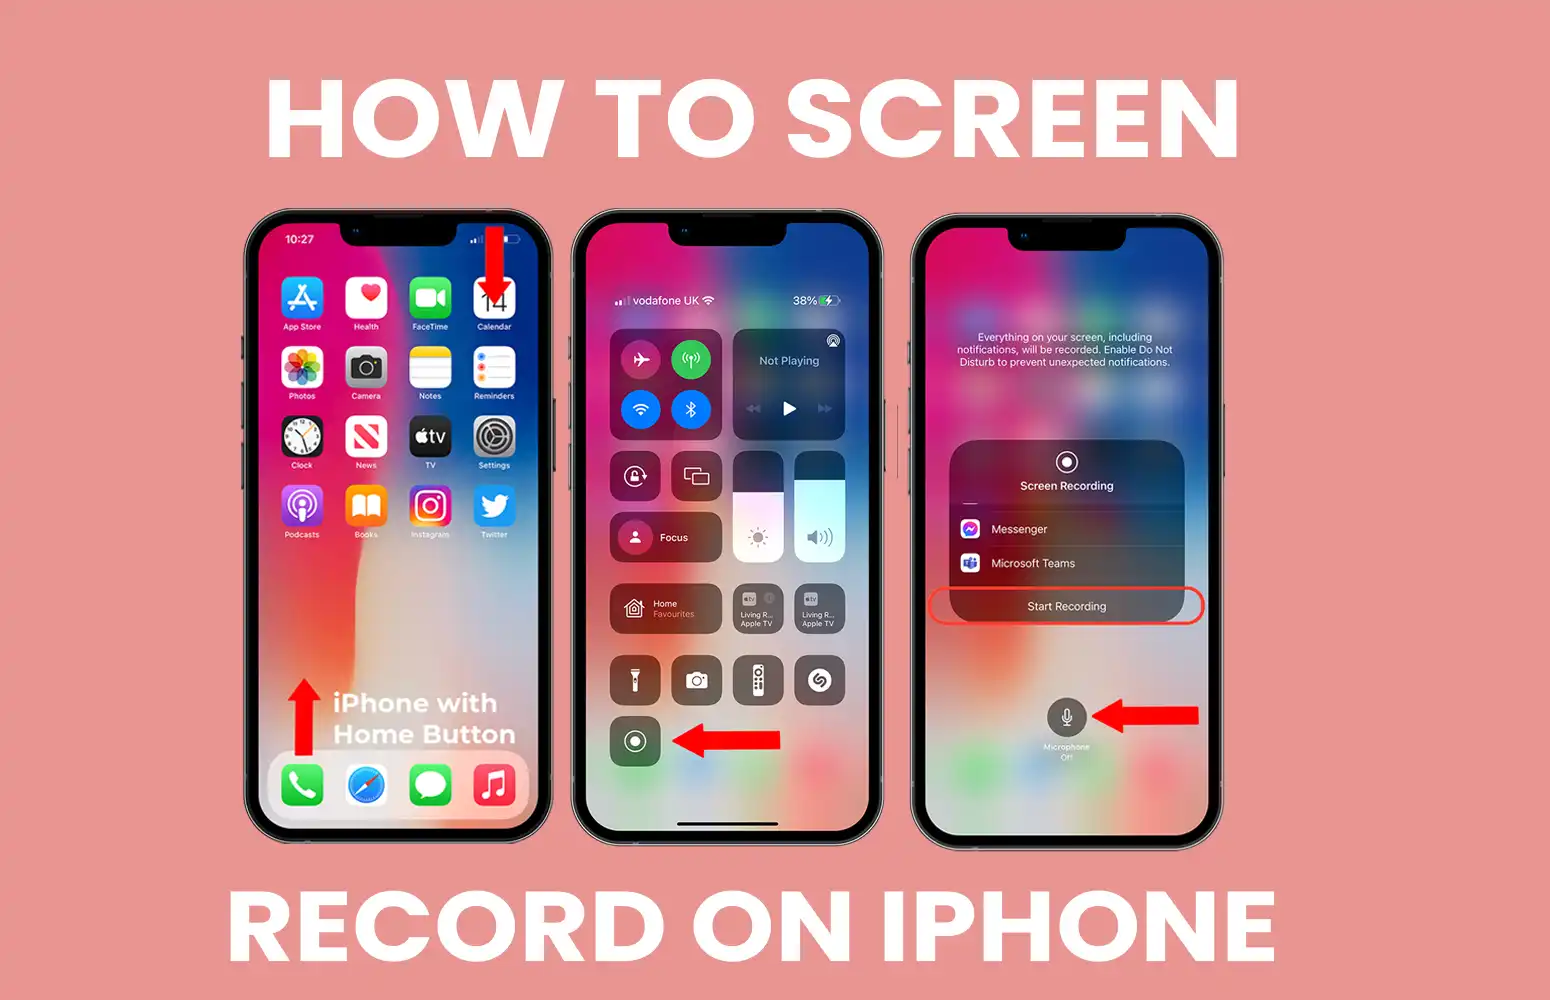 how to screen record on iPhone